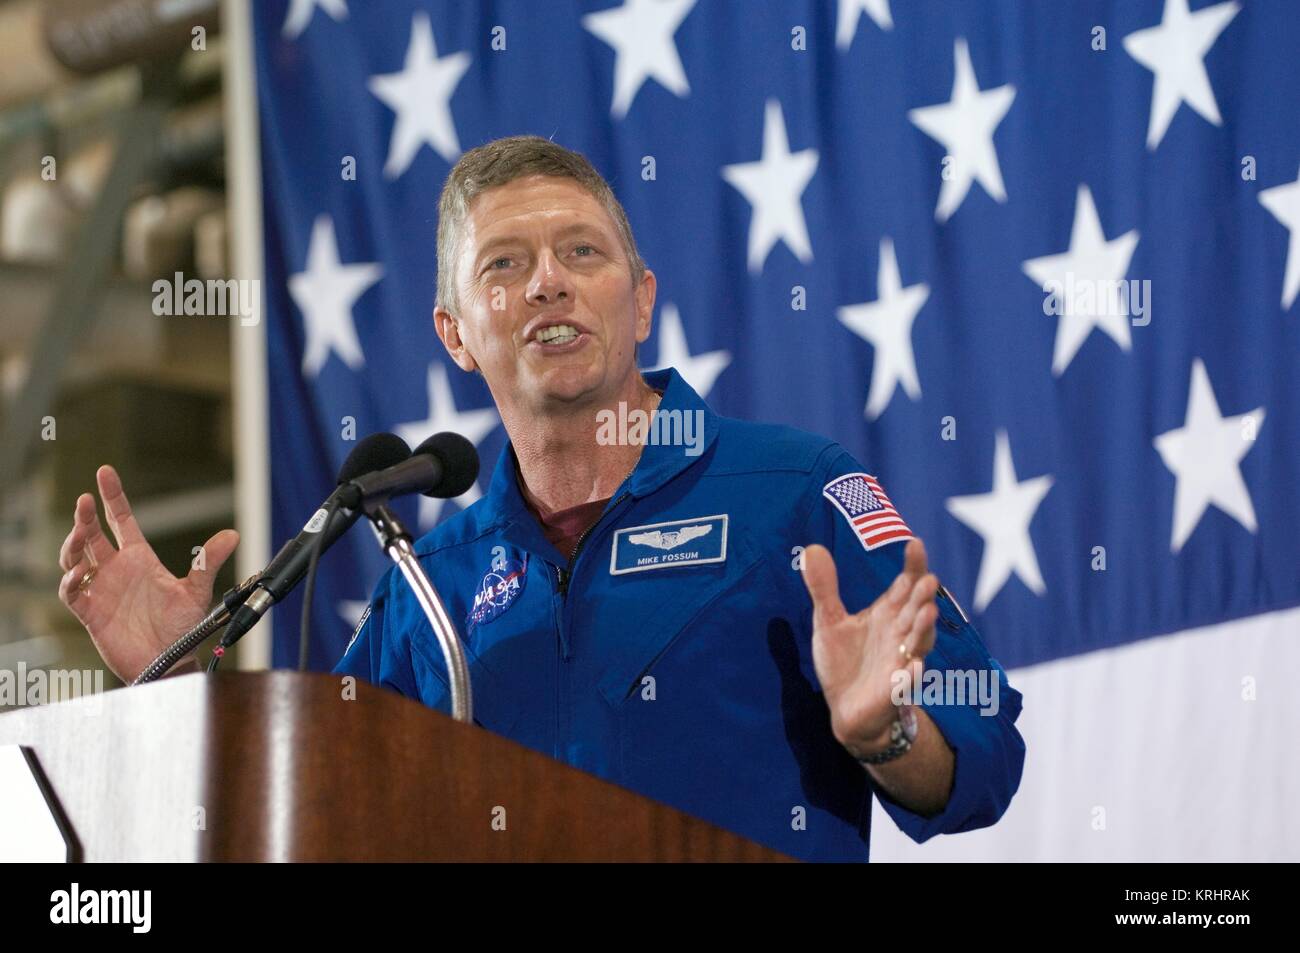 NASA International Space Station Space Shuttle Discovery STS-121 mission prime crew member American astronaut Michael Fossum speaks during the crew return ceremony at the Johnson Space Center Ellington Field Hangar 276 June 18, 2006 in Houston, Texas. Stock Photo